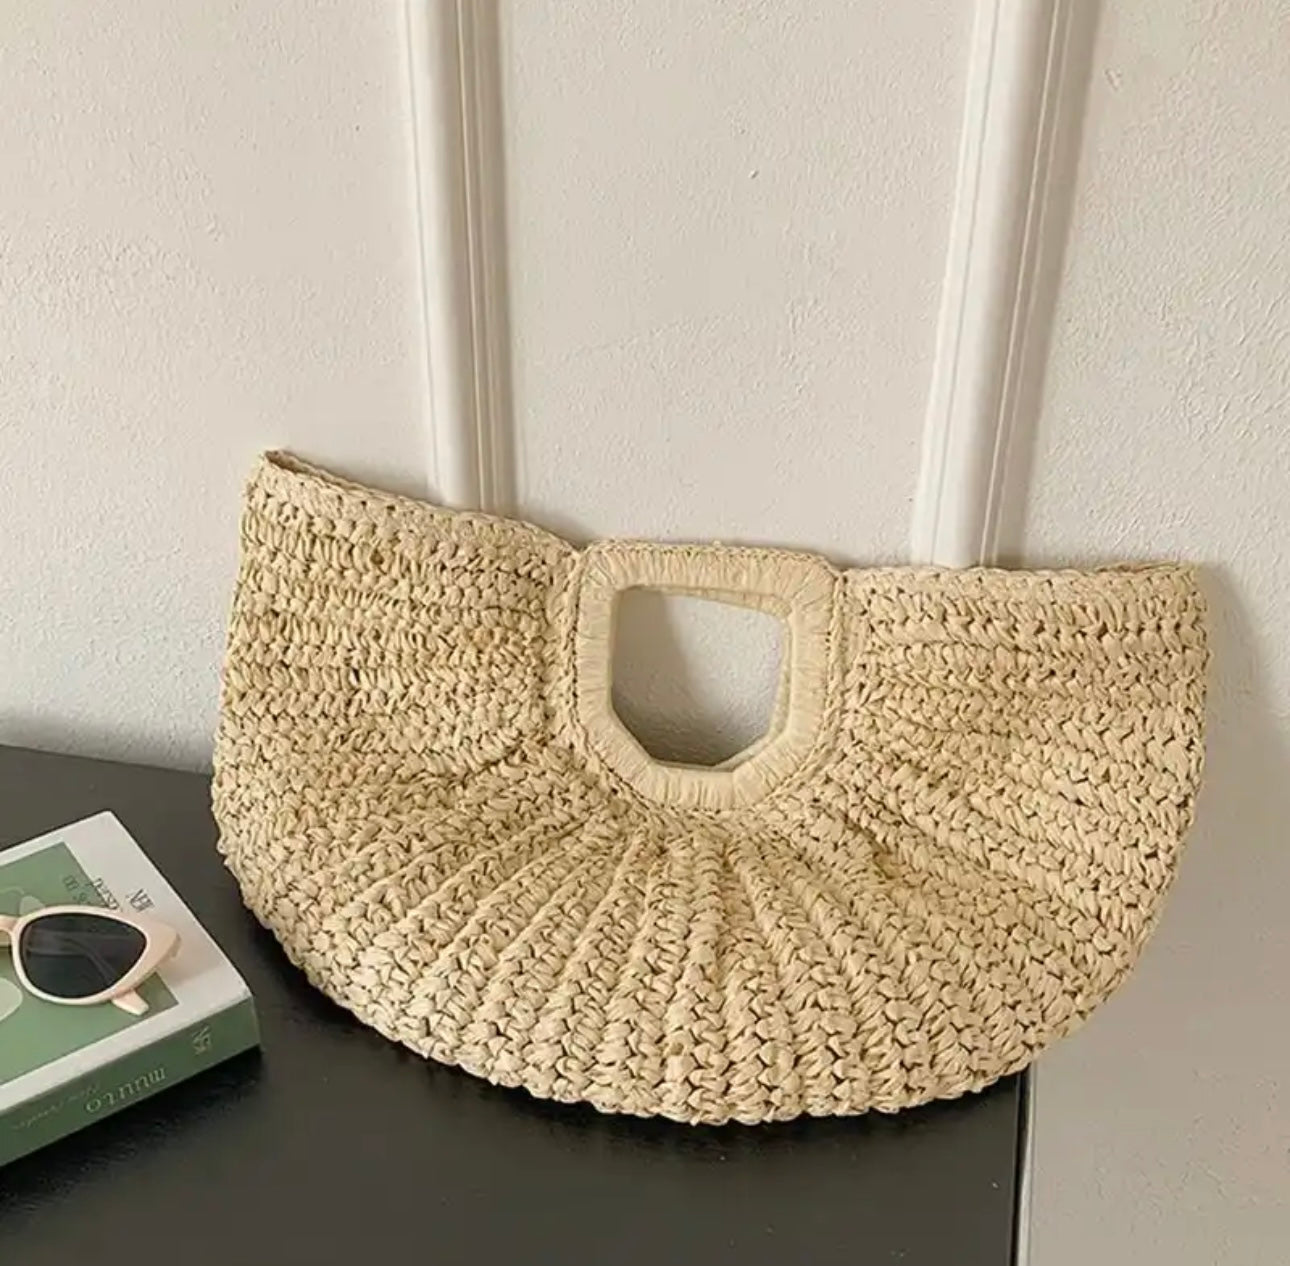 The Let’s Go To Bali | Knitted Tote Bag (Comes In Other Colors)